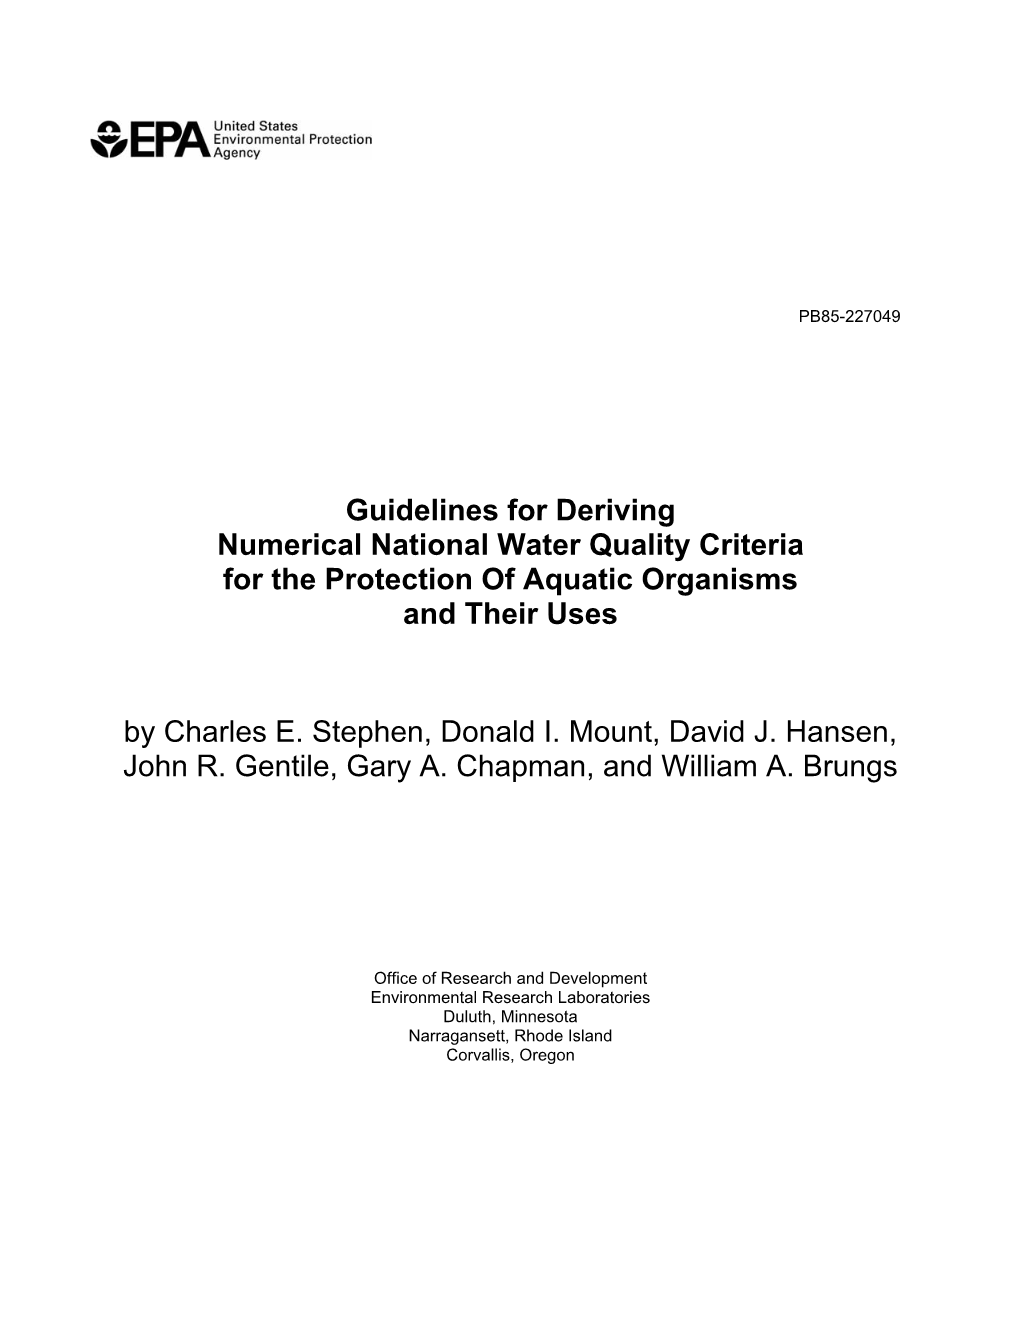 Guidelines for Deriving Numerical National Water Quality Criteria for the Protection of Aquatic Organisms and Their Uses by Charles E